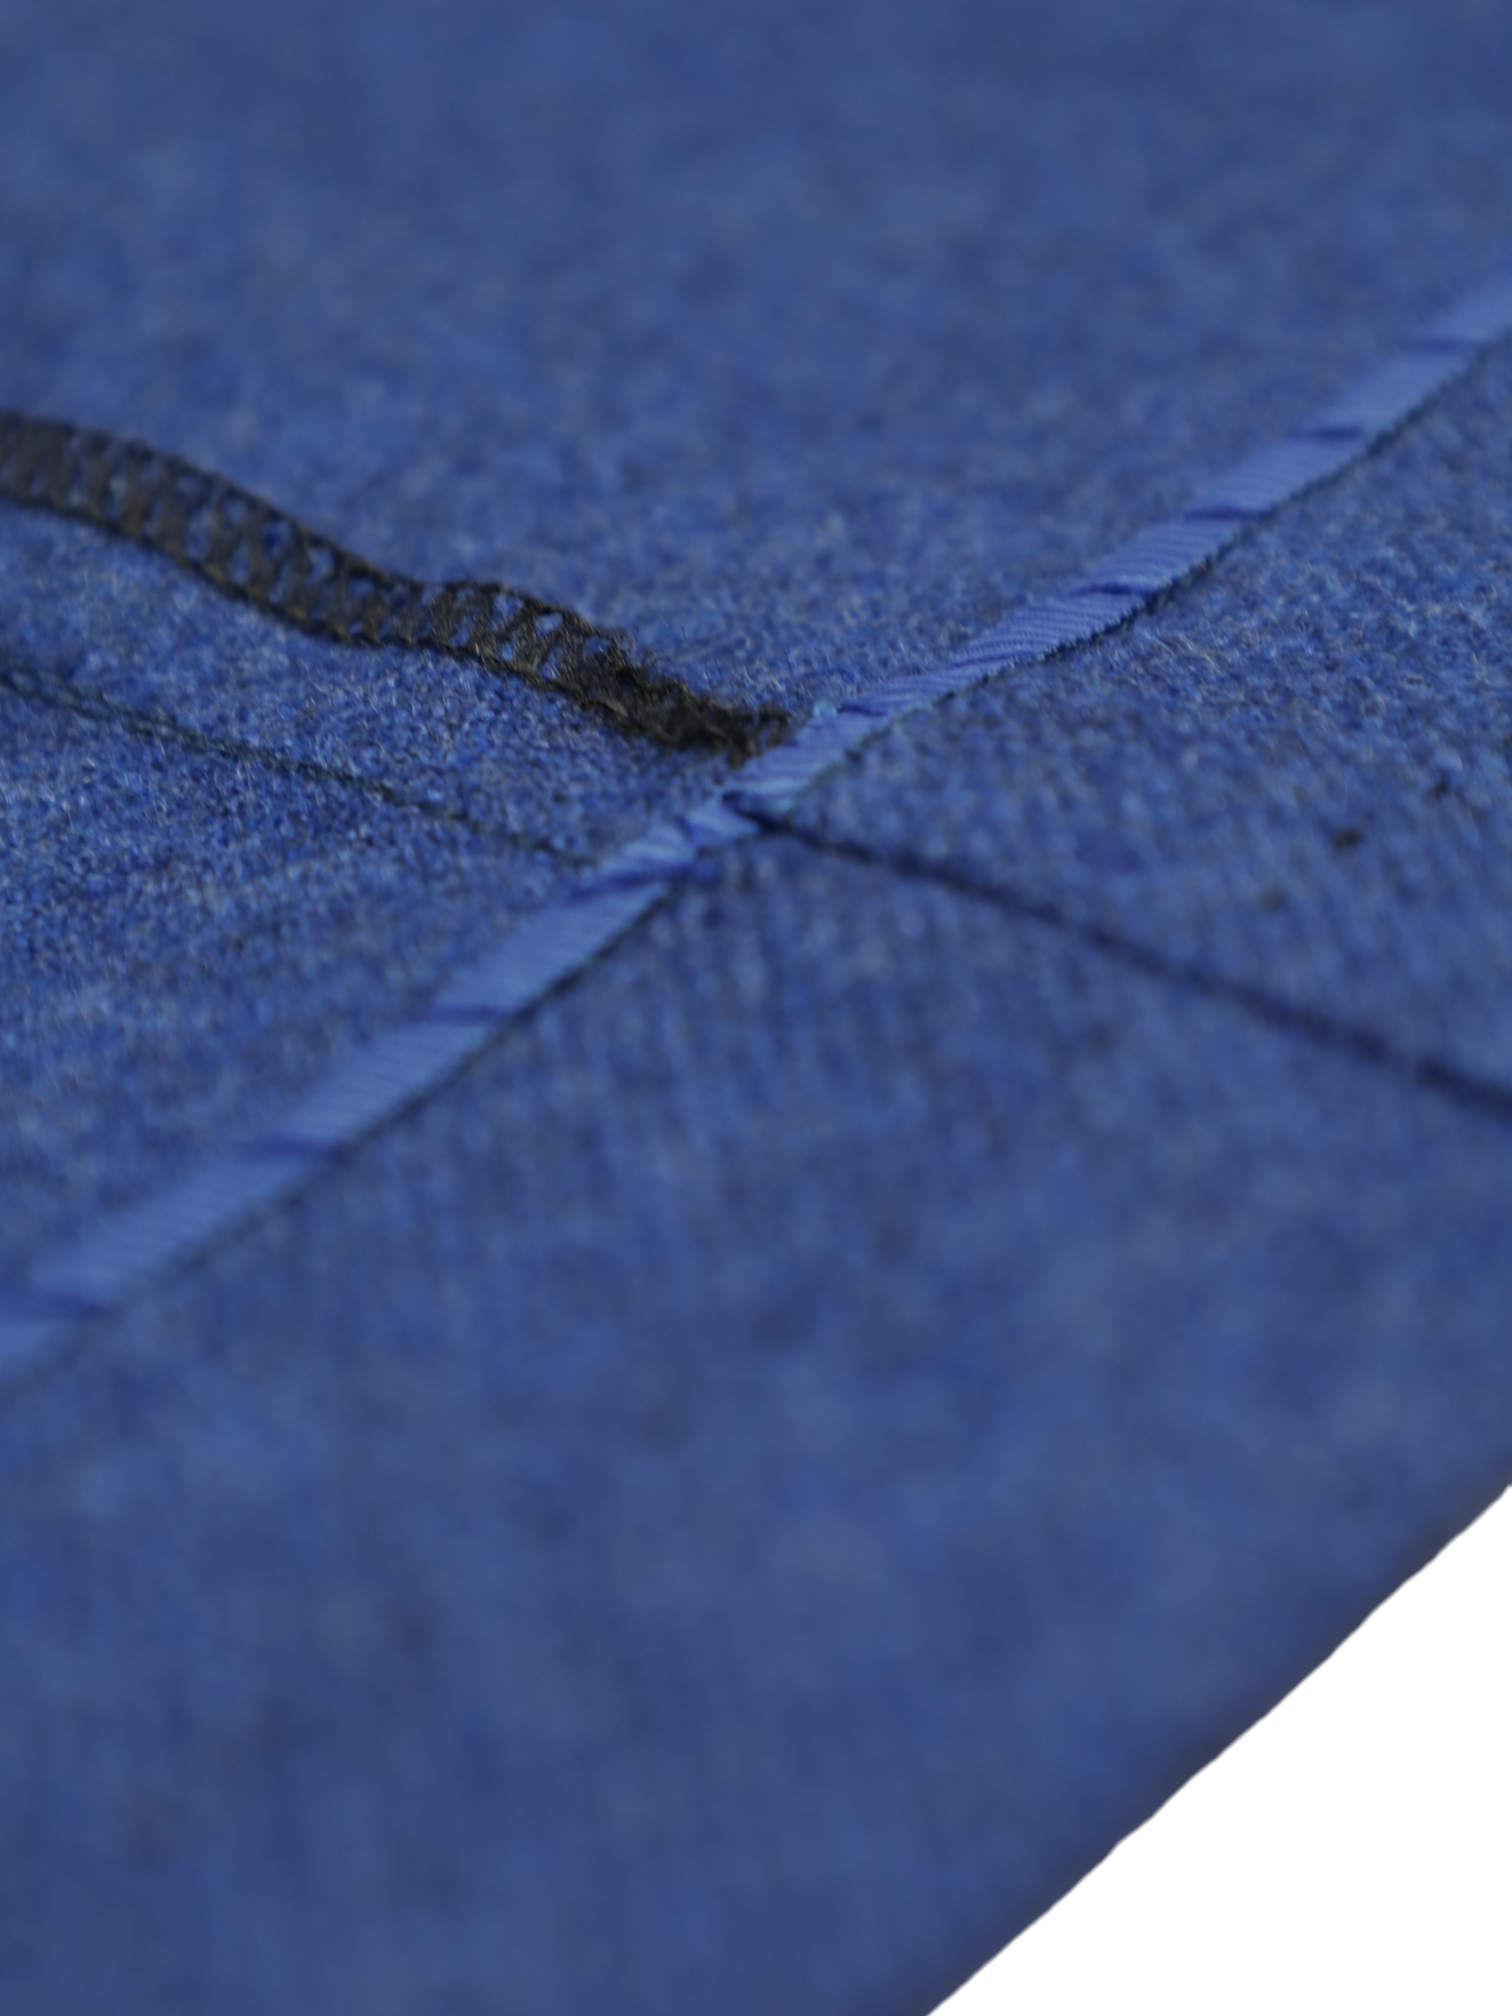 Cesare Attolini Royal Blue Wool & Cashmere Twill Jacket